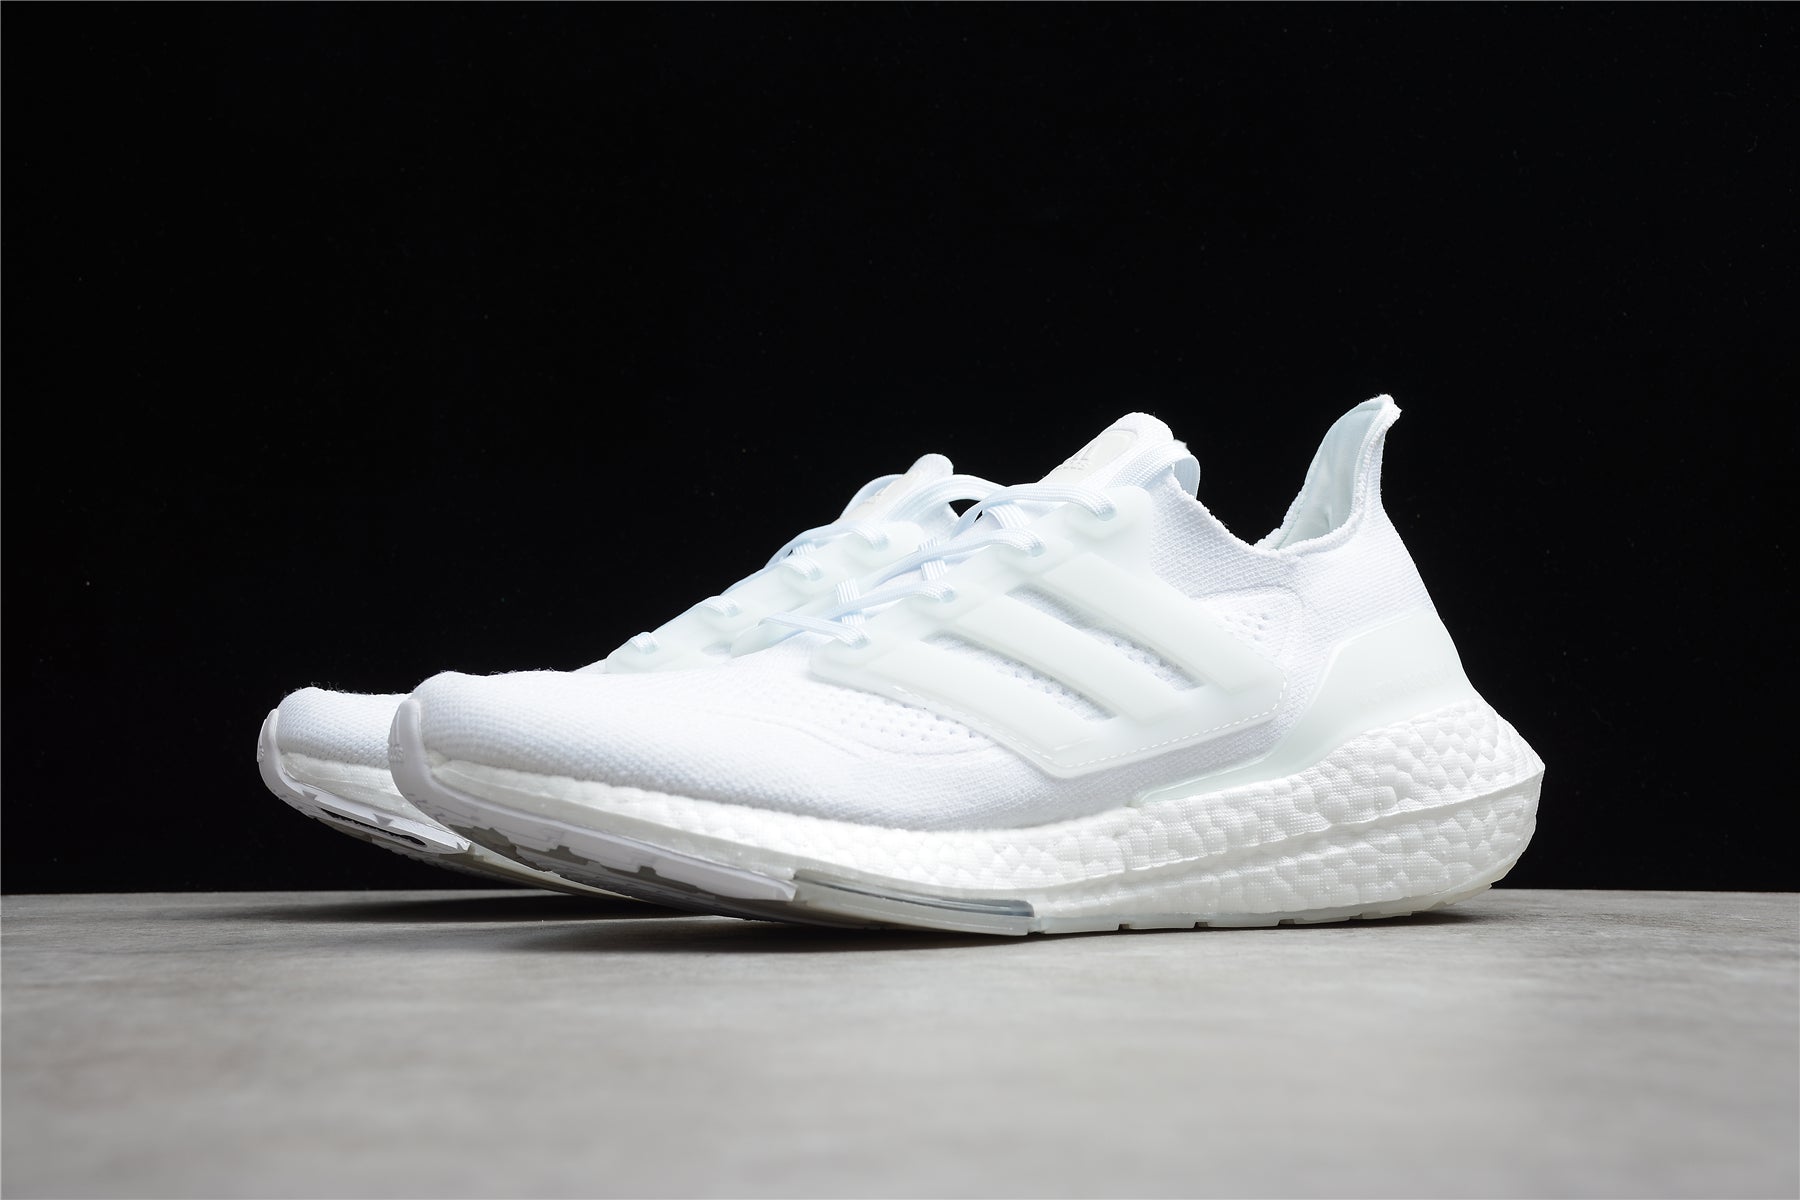 Chaussures Adidas Ultraboost entièrement blanches